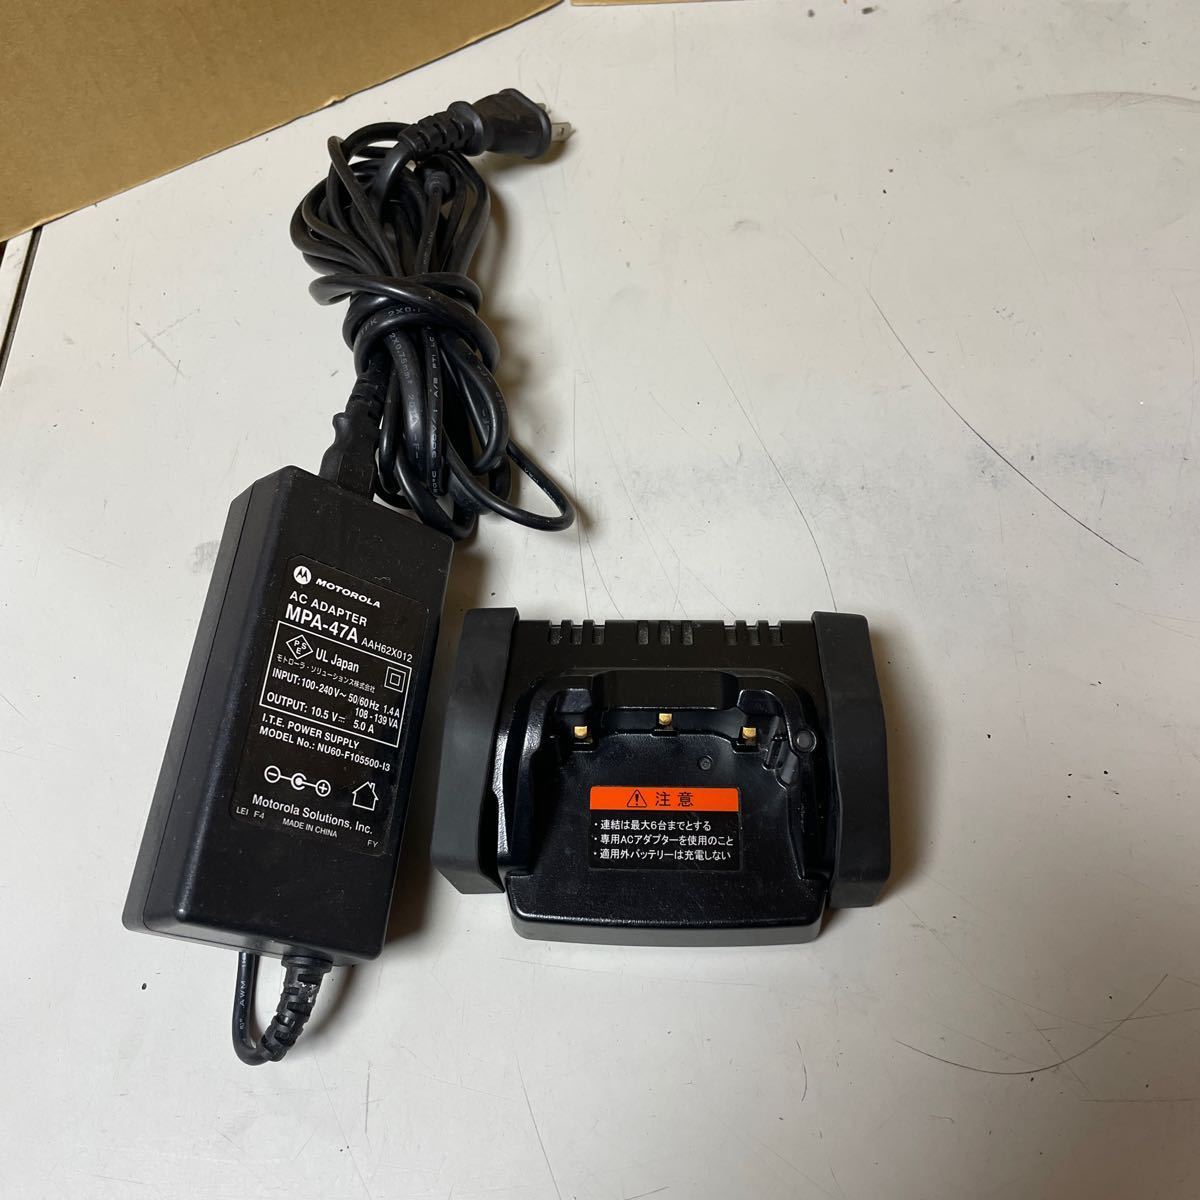 N1205/ connection type fast charger charge stand CD-51 AC adaptor MPA-47A set operation goods 